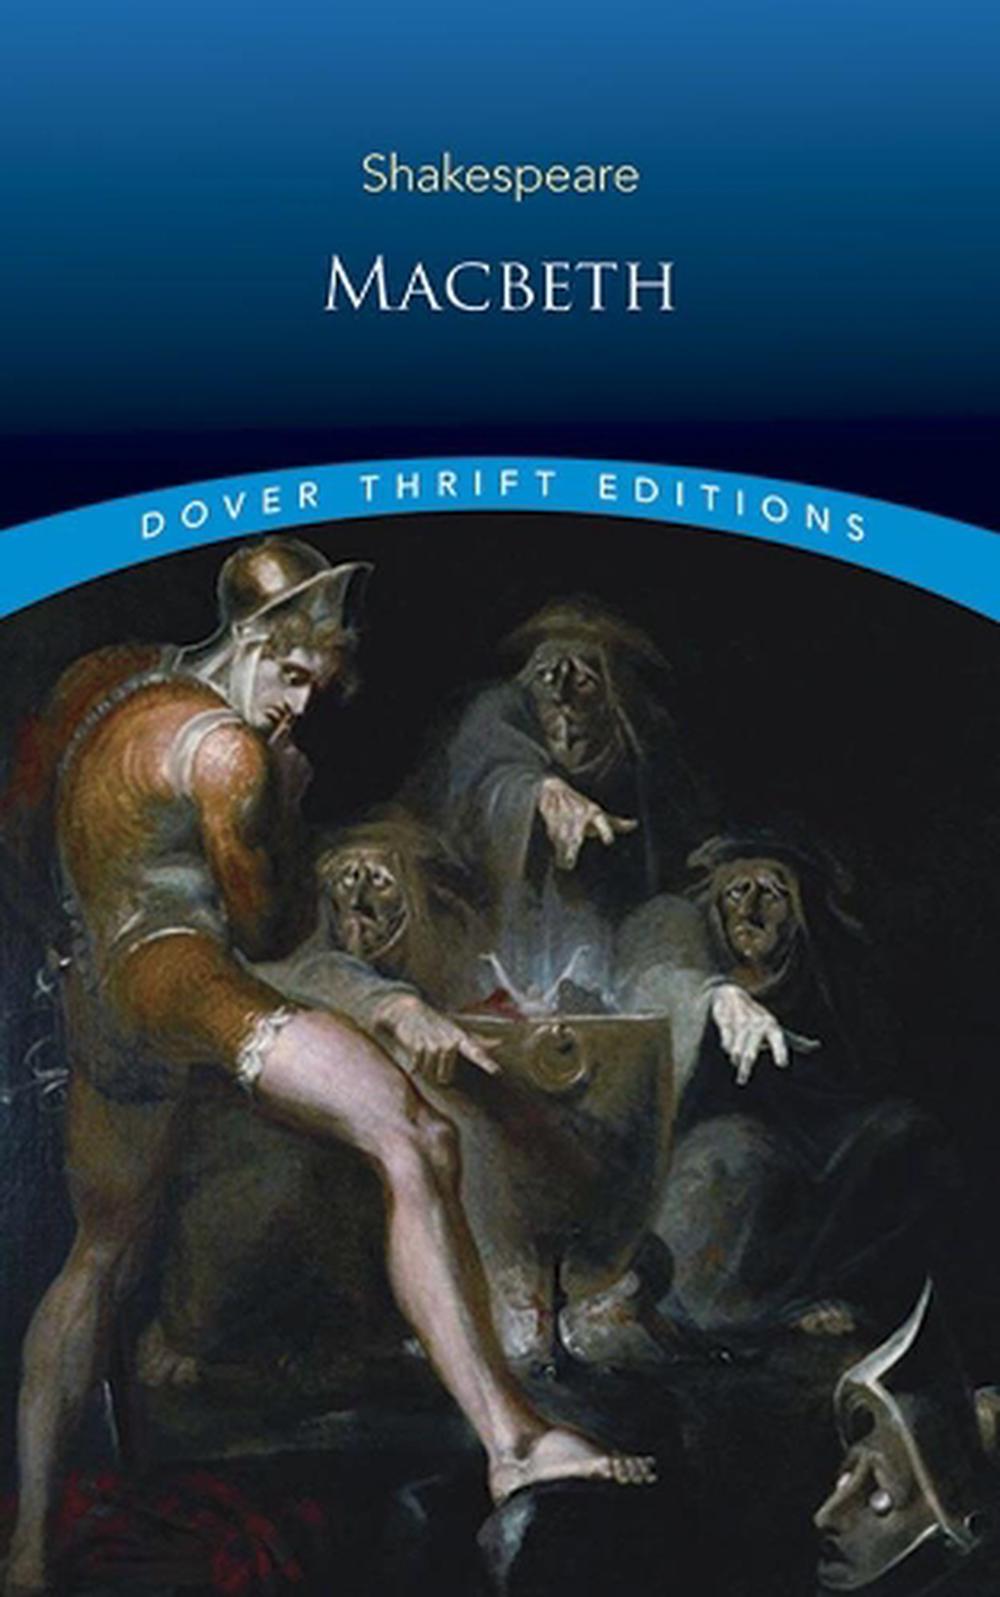 book review for macbeth